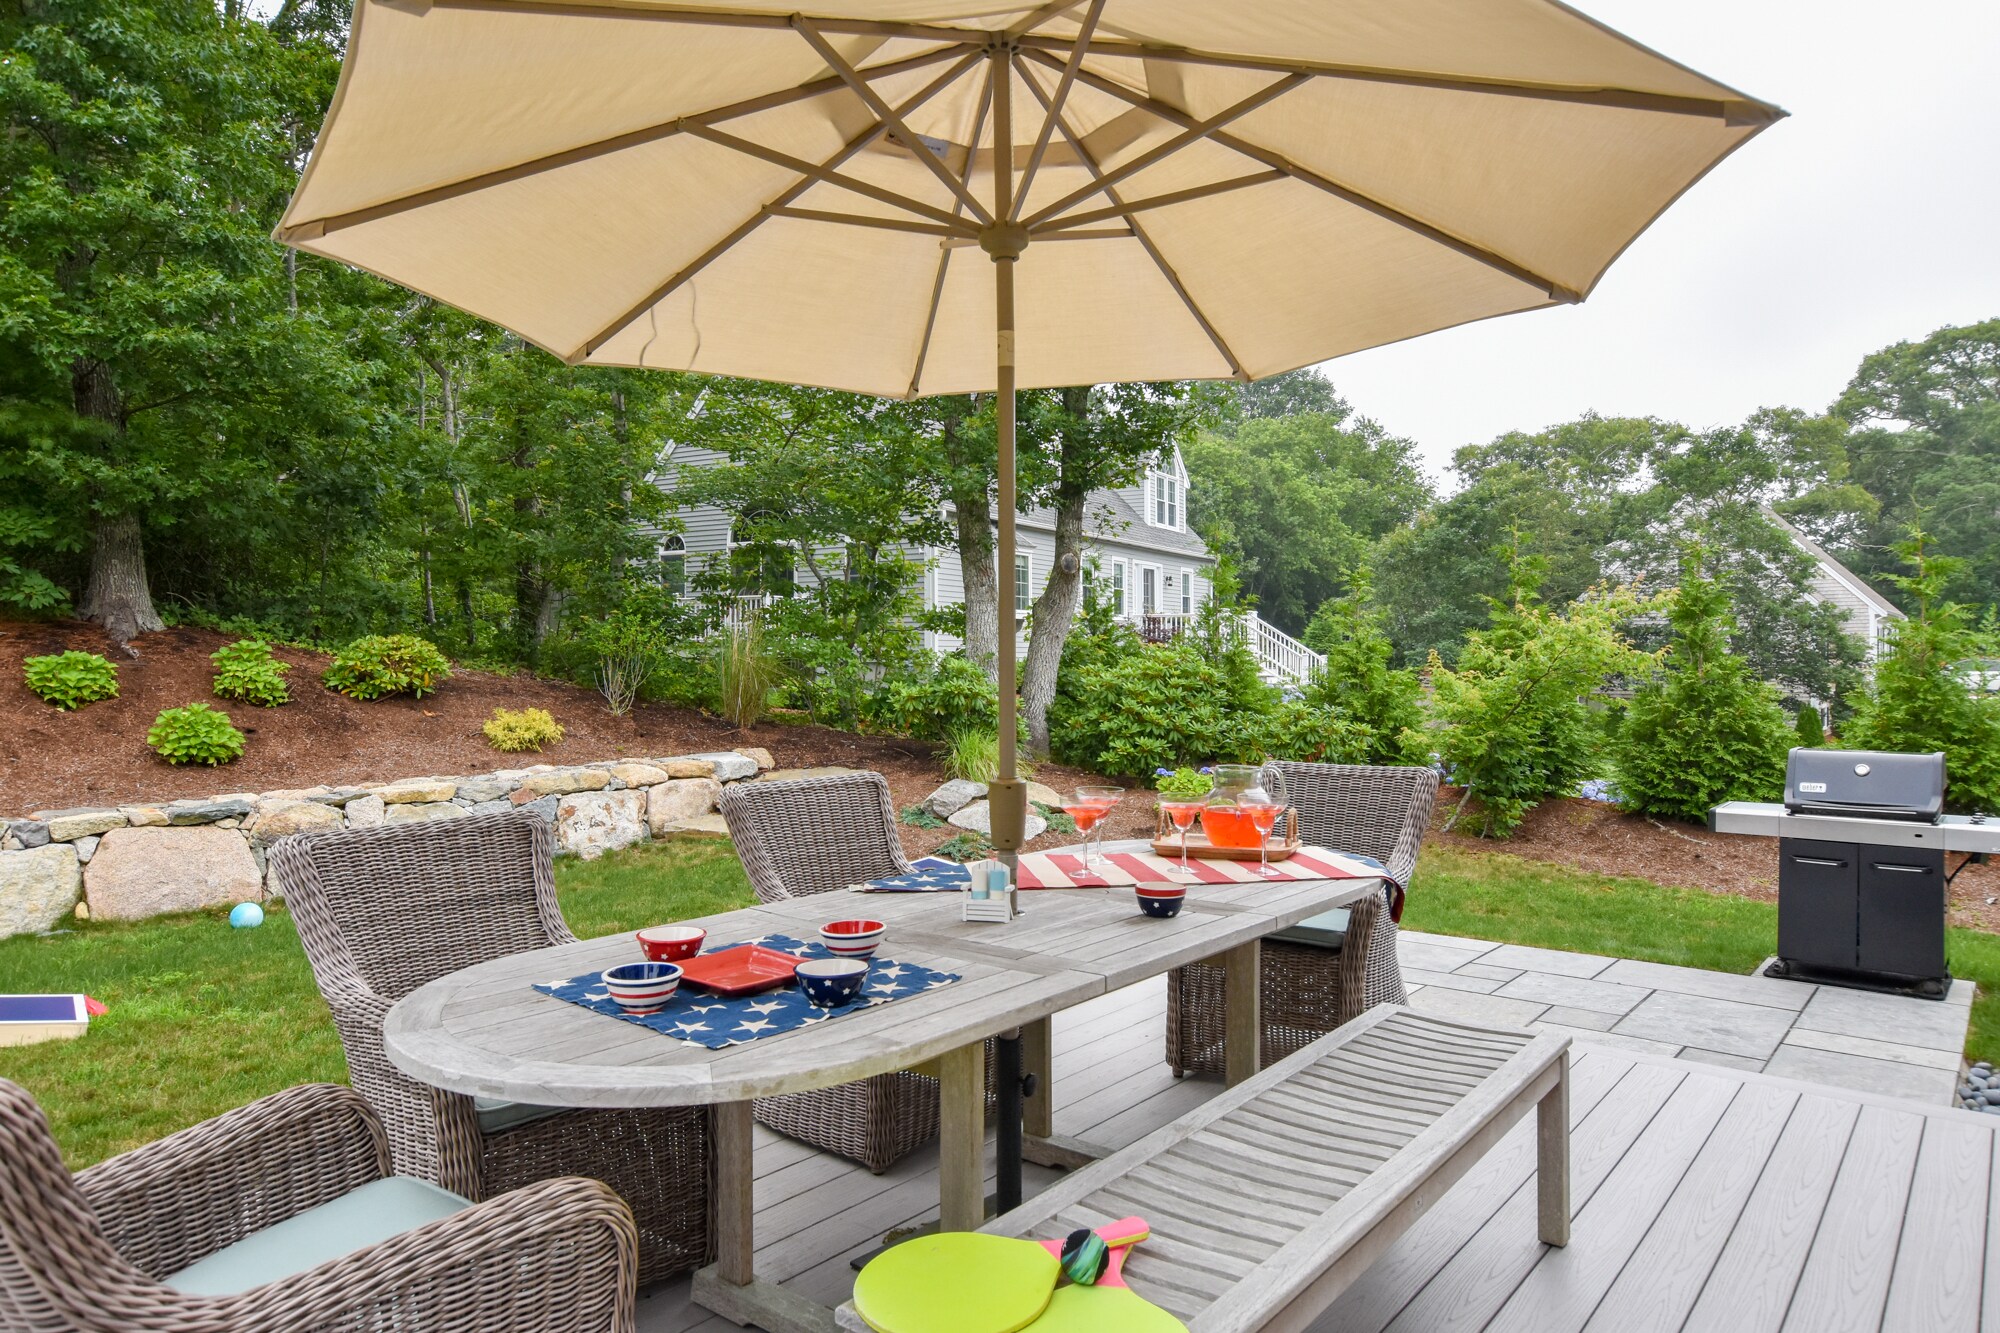 Dine alfresco on the deck with table seating for six.